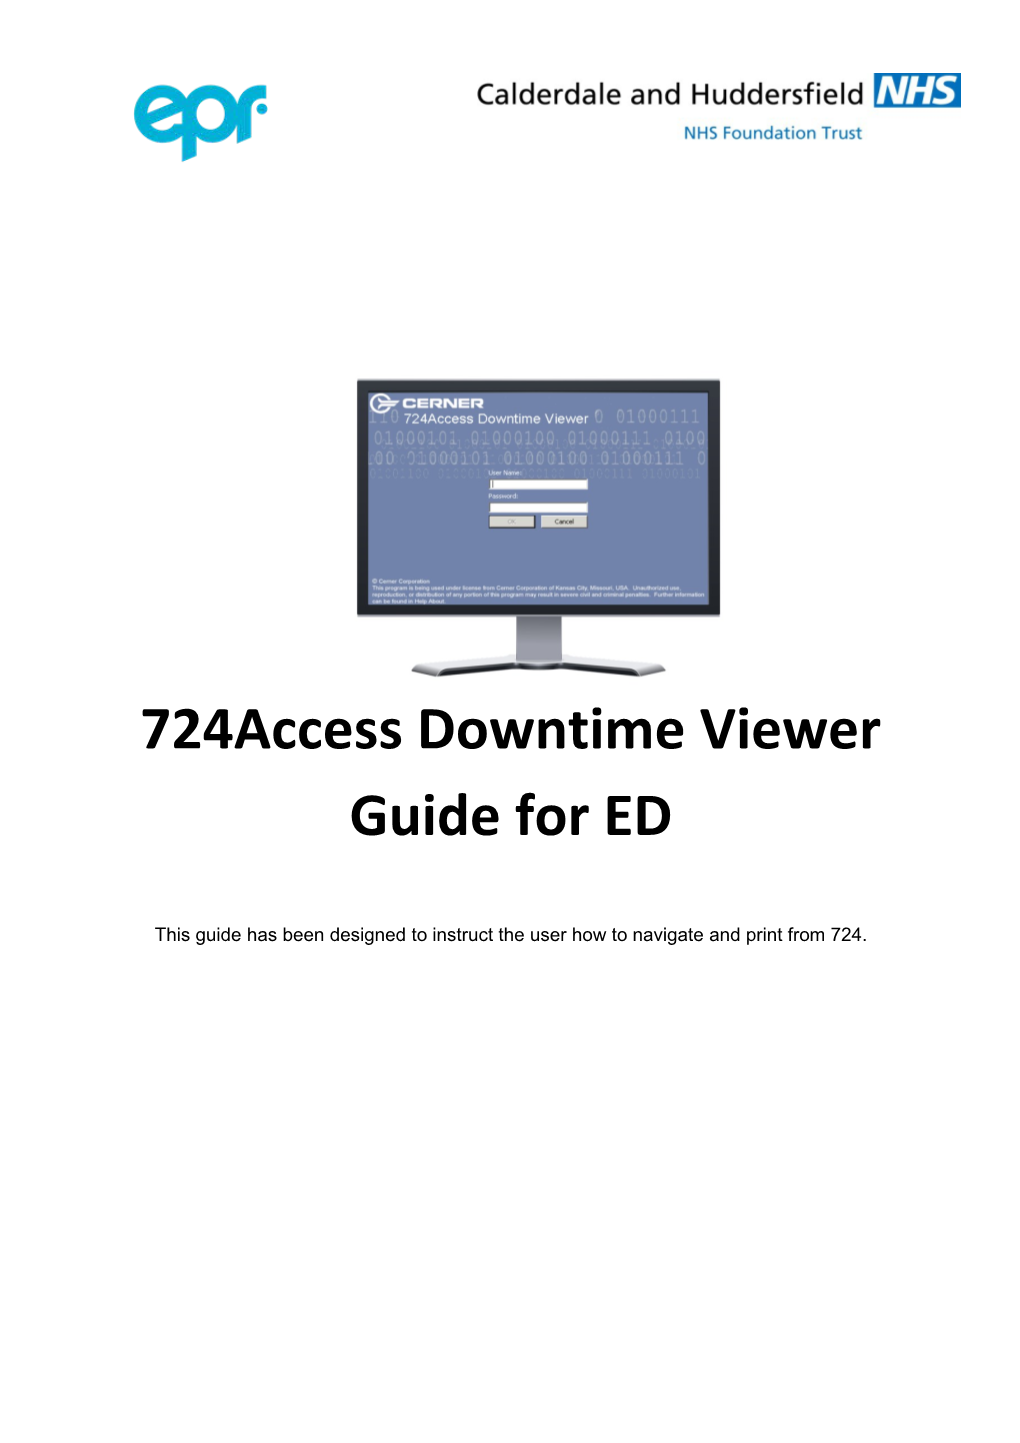 724Access Downtime Viewer Guide for ED